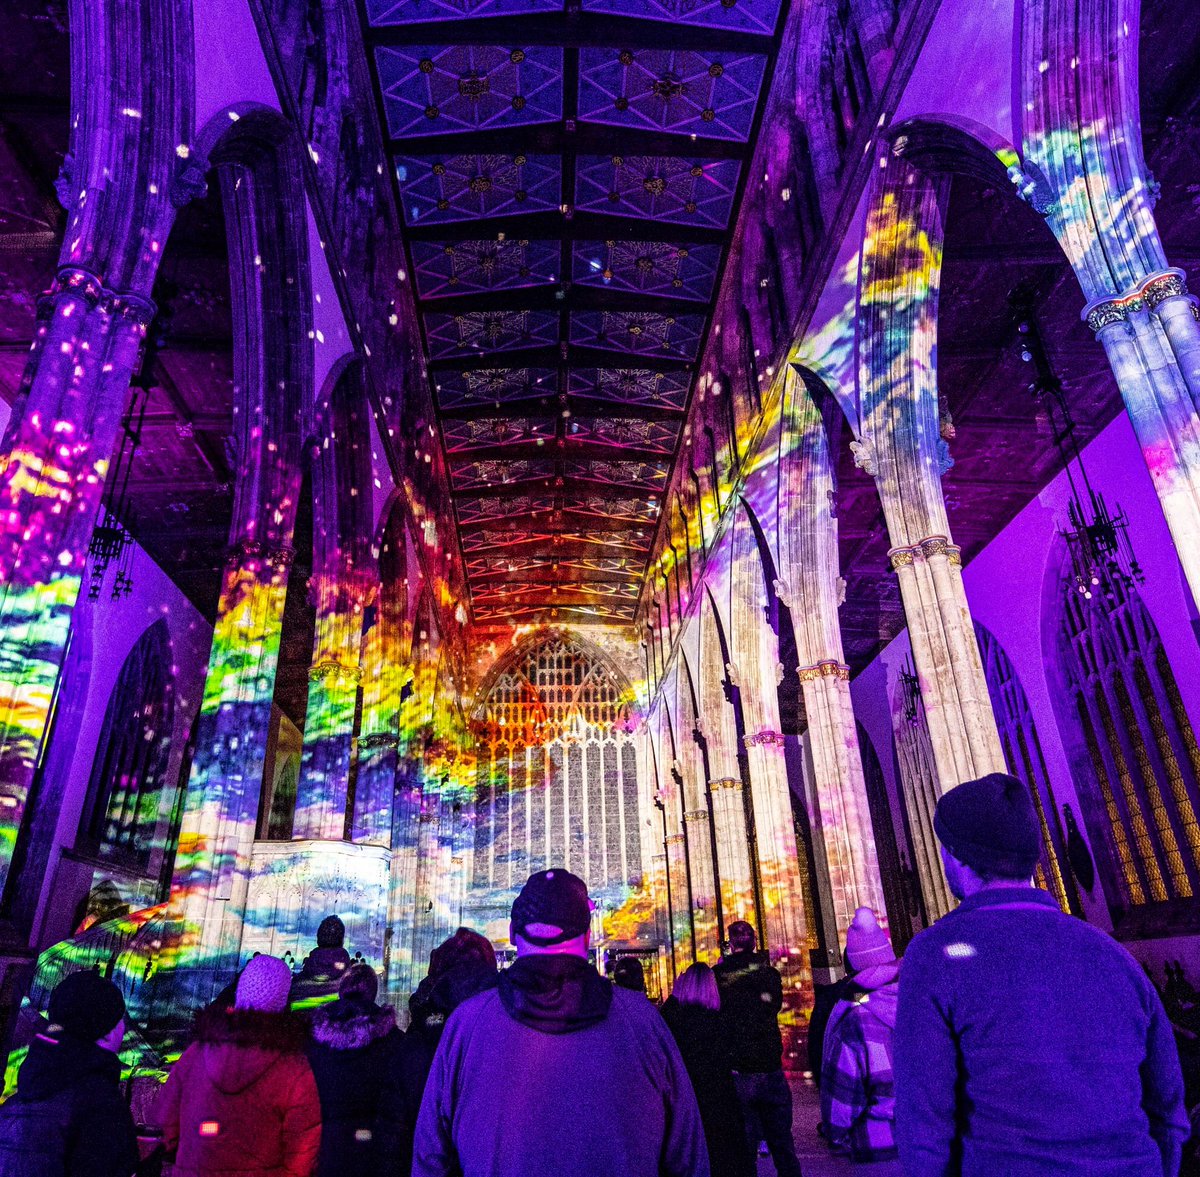 Luxmuralis is returning for a third year to @durhamcathedral with Space, and tickets go on sale today at 11am. From Wed 9 to Sun 13 October, visitors will experience stunning light projections of galaxies with immersive sound. Find out more here: tinyurl.com/24hur64a